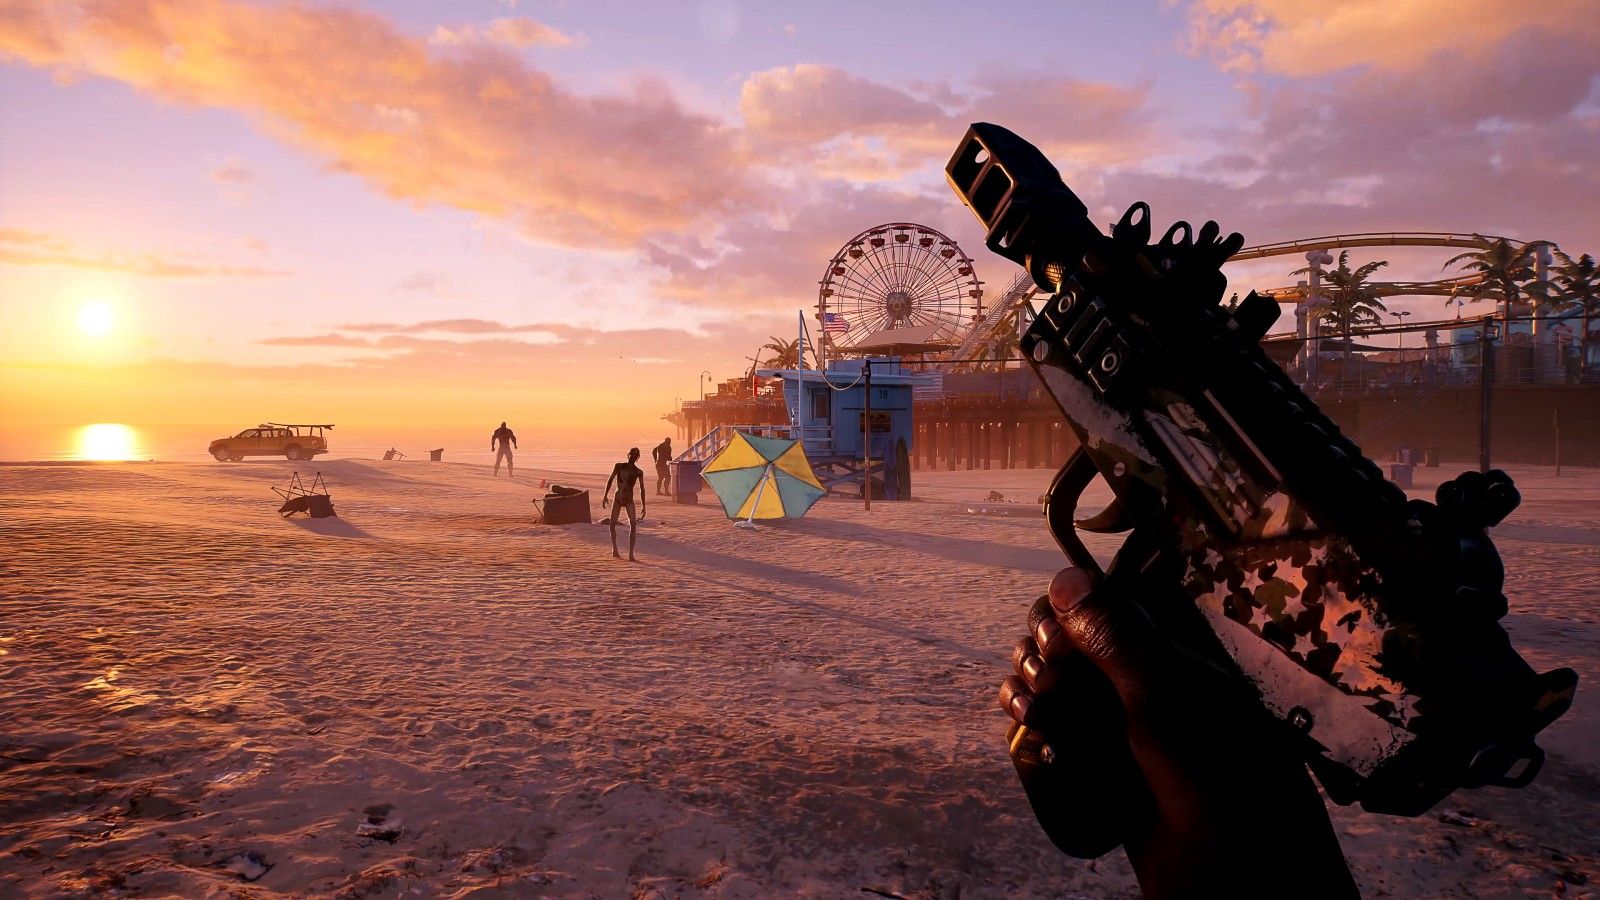 Dead Island 2 beach at sunset with a fairground in the distance, zombies shambling across the sands, and the player holding a machine gun.